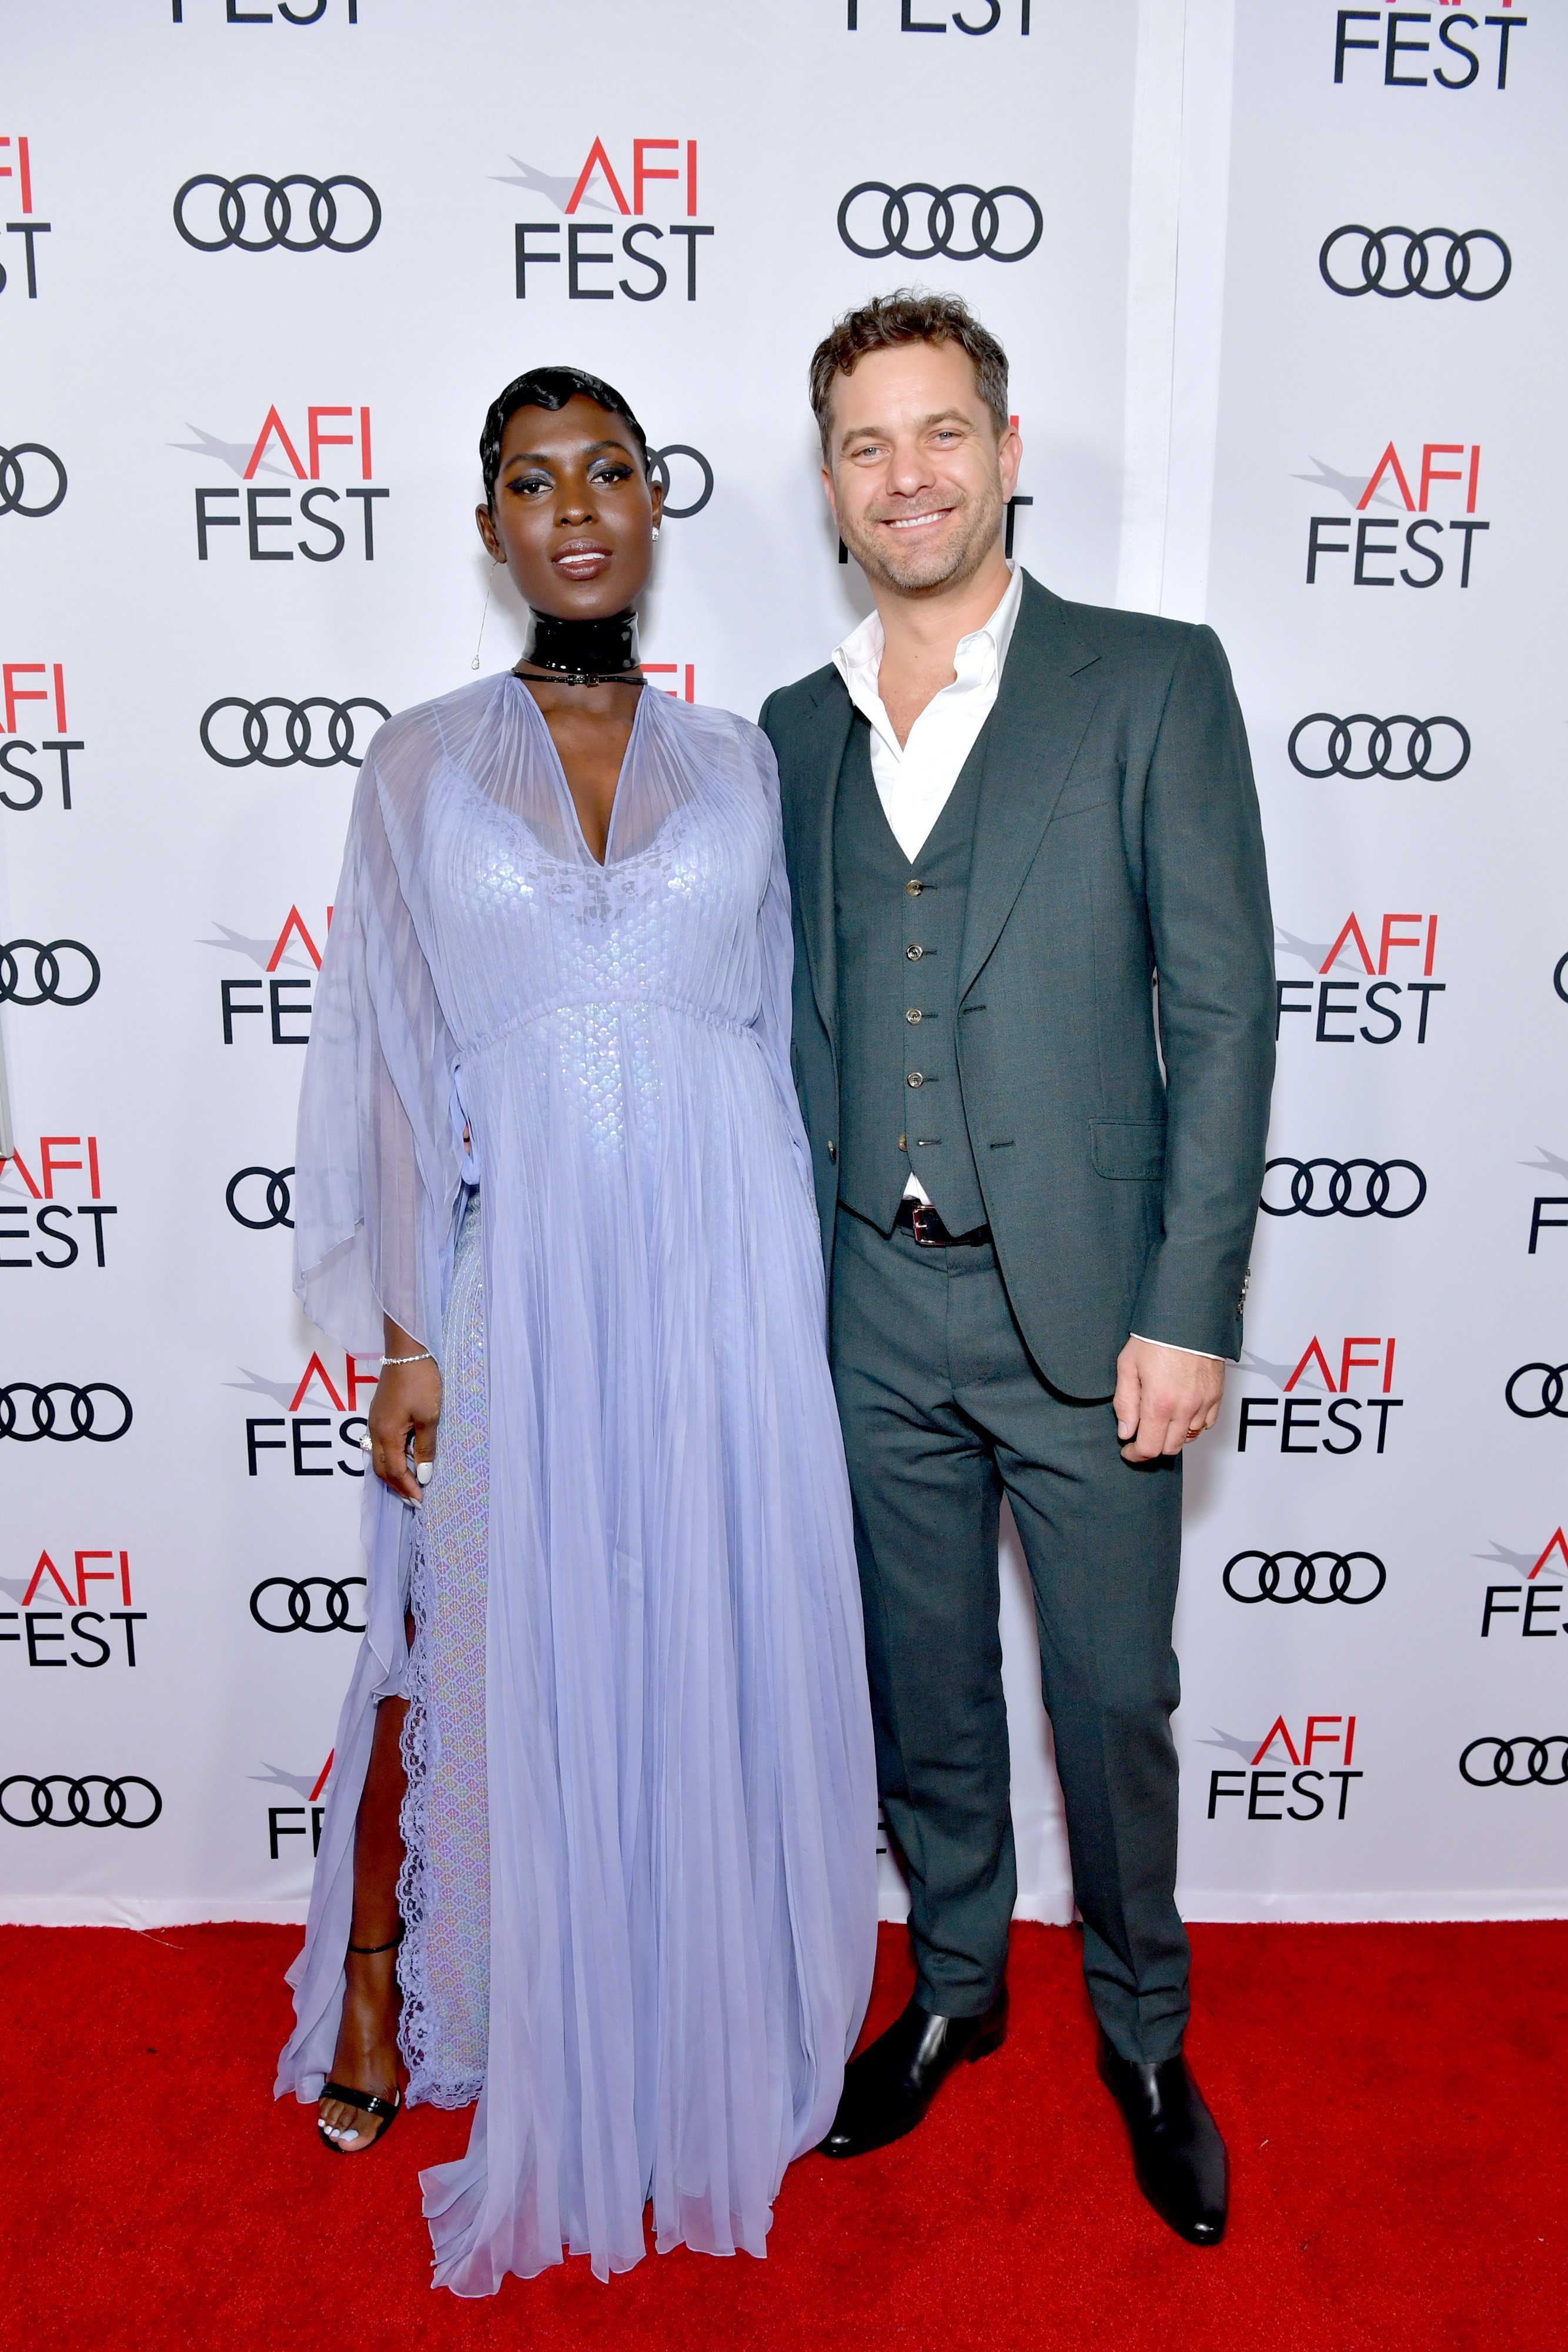 Joshua Jackson and Jodie Turner-Smith at the "Queen & Slim" premiere in November 2019. | Photo: Emma McIntyre/Getty Images